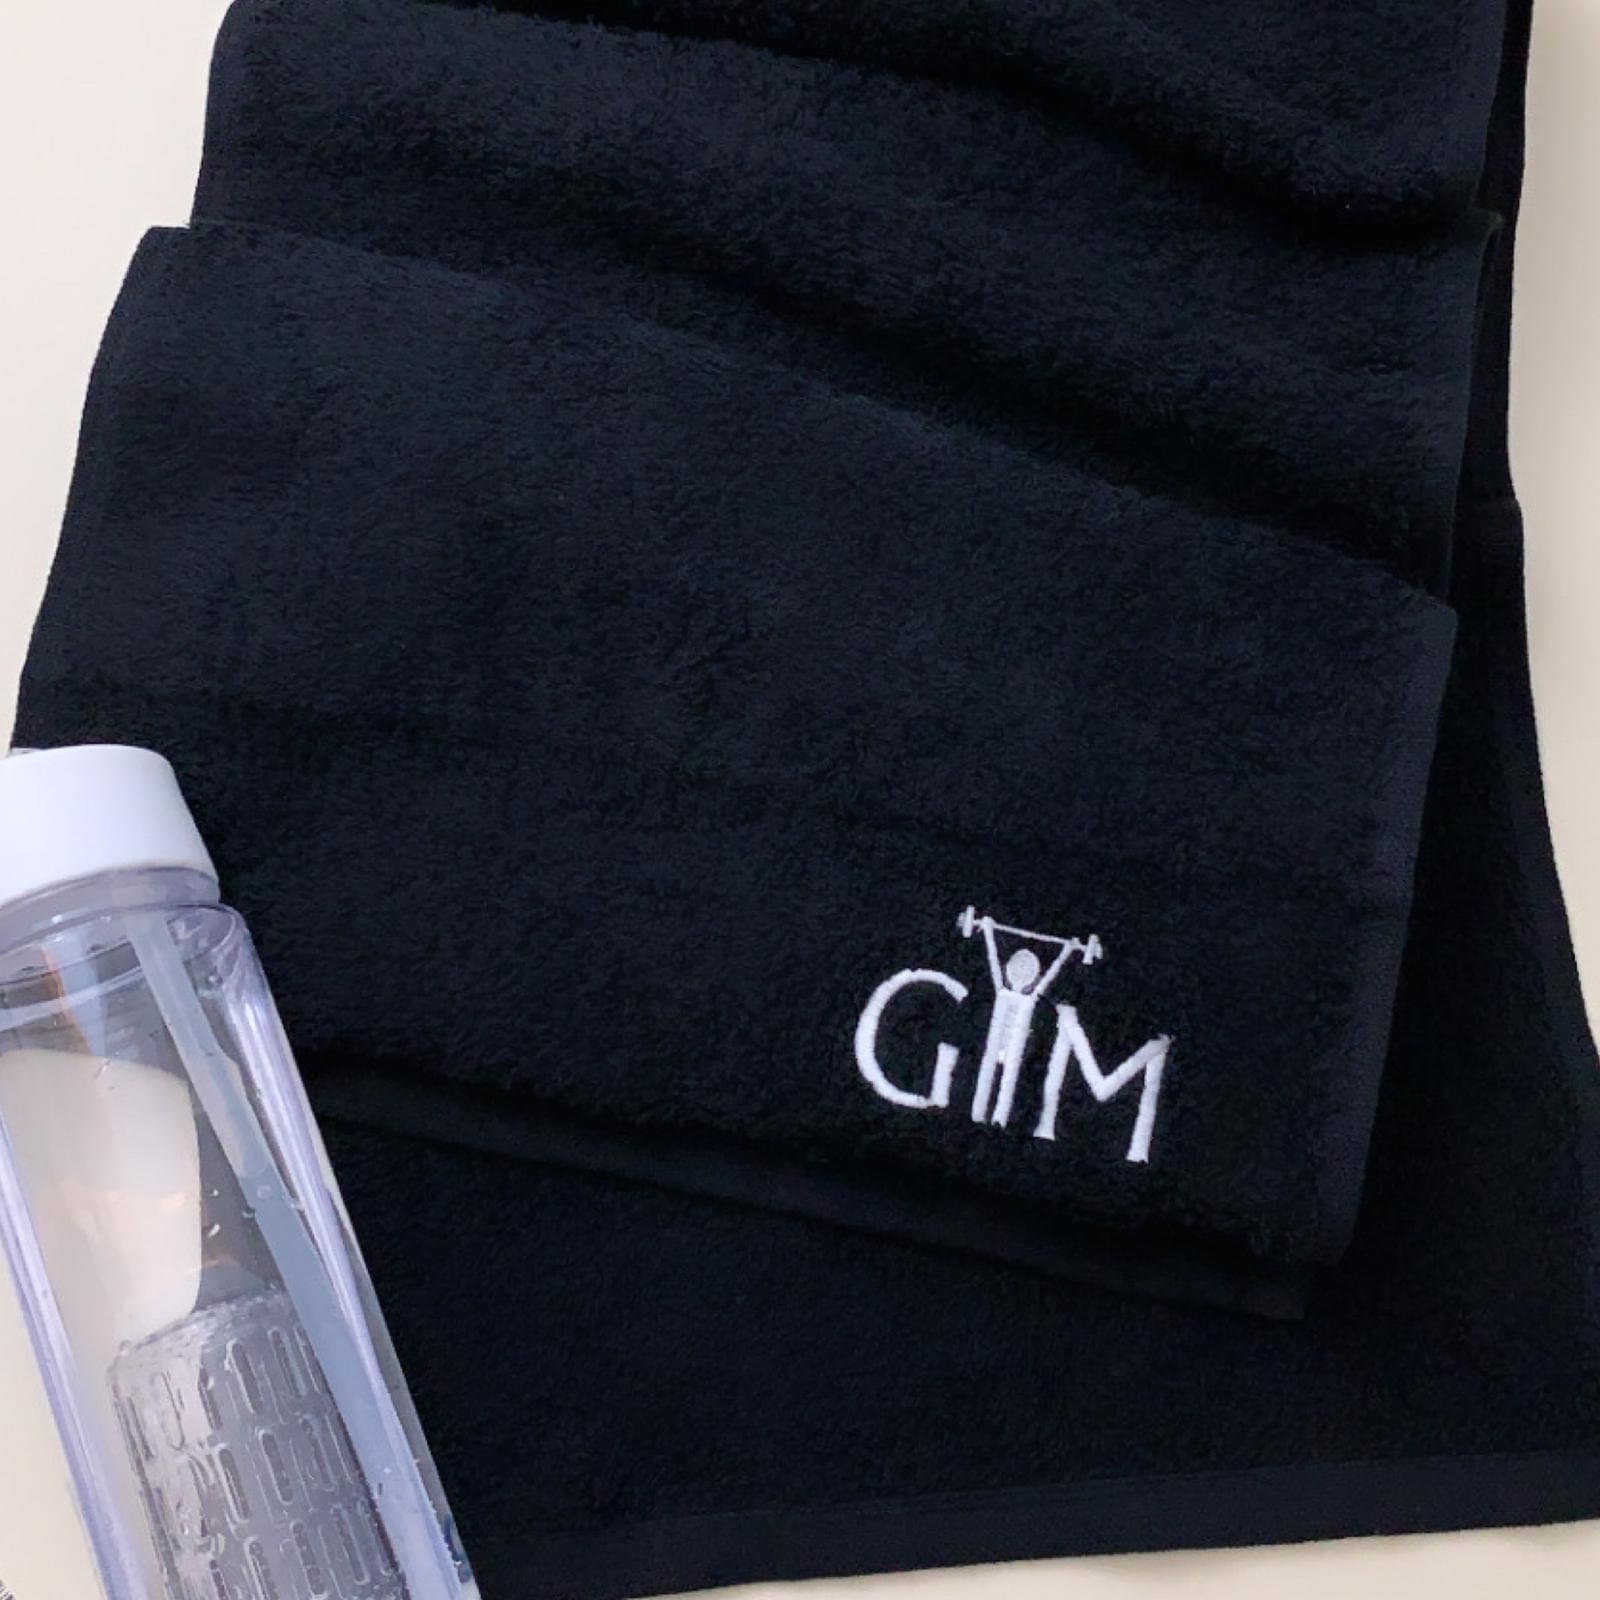 Gym Towel 100% Soft Cotton Towelling Handy Size, Available in Five